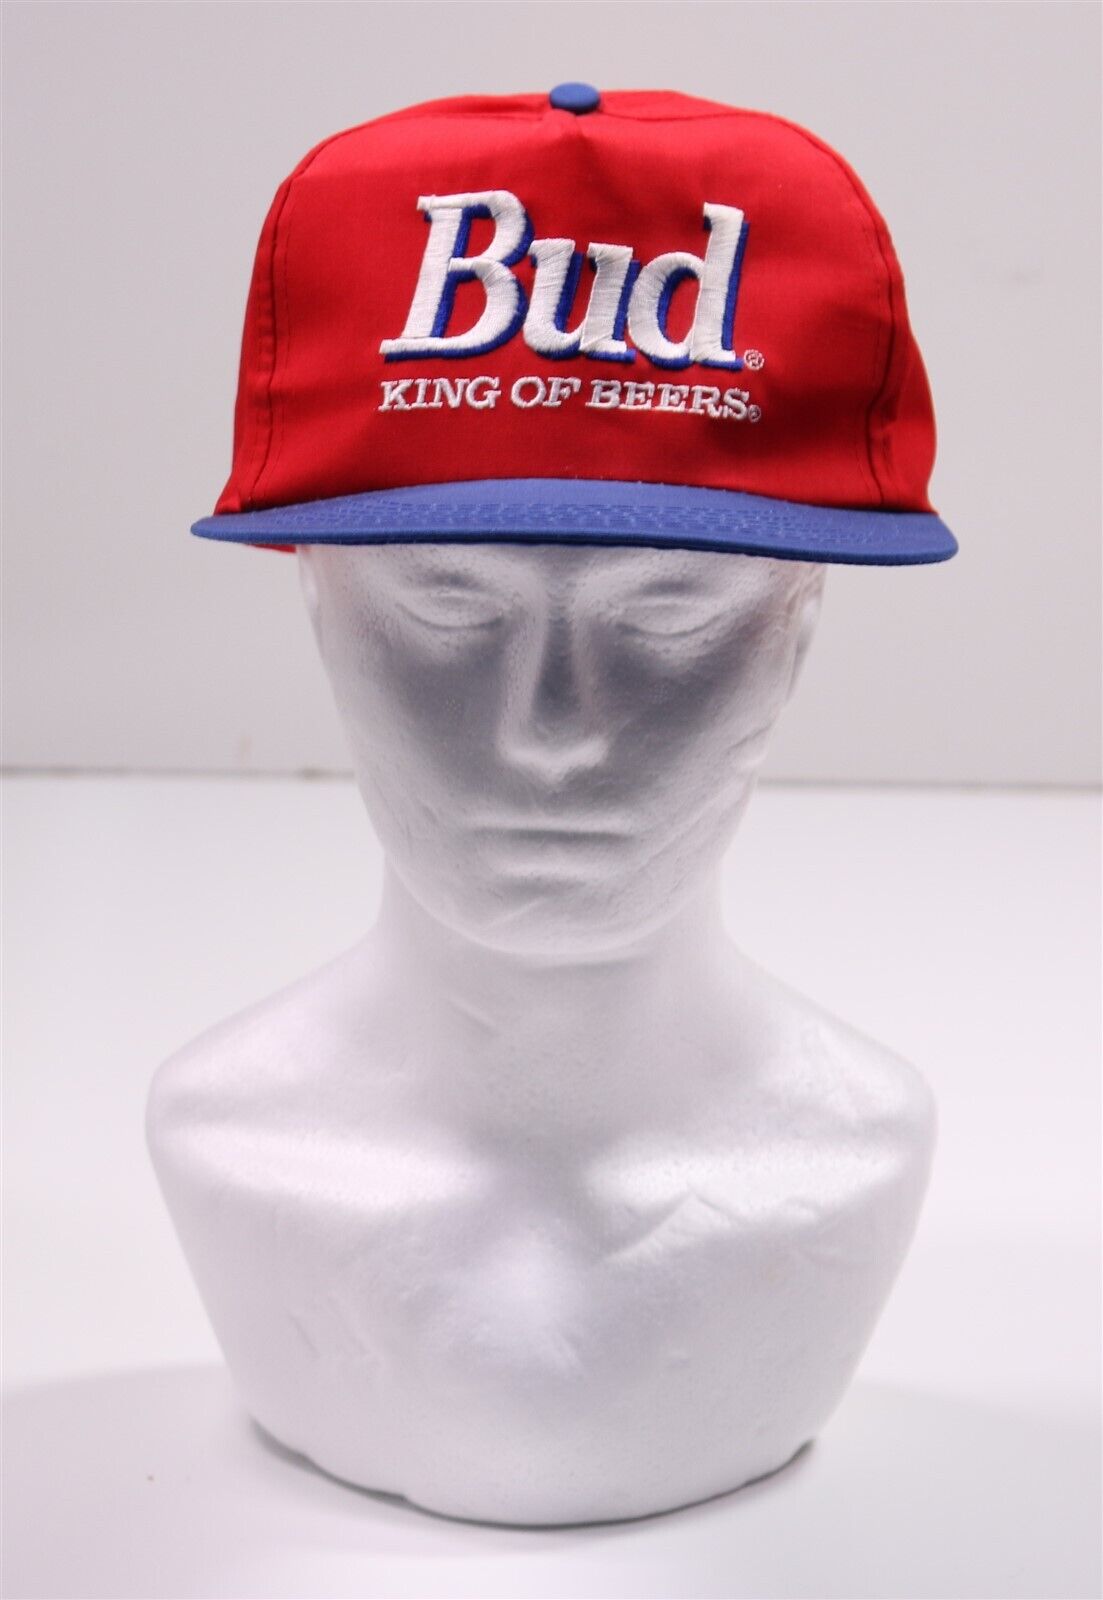 Bud King of Beers Vintage 1990\'s 1980\'s Embroidered Snapback Hat Red/Blue Rare